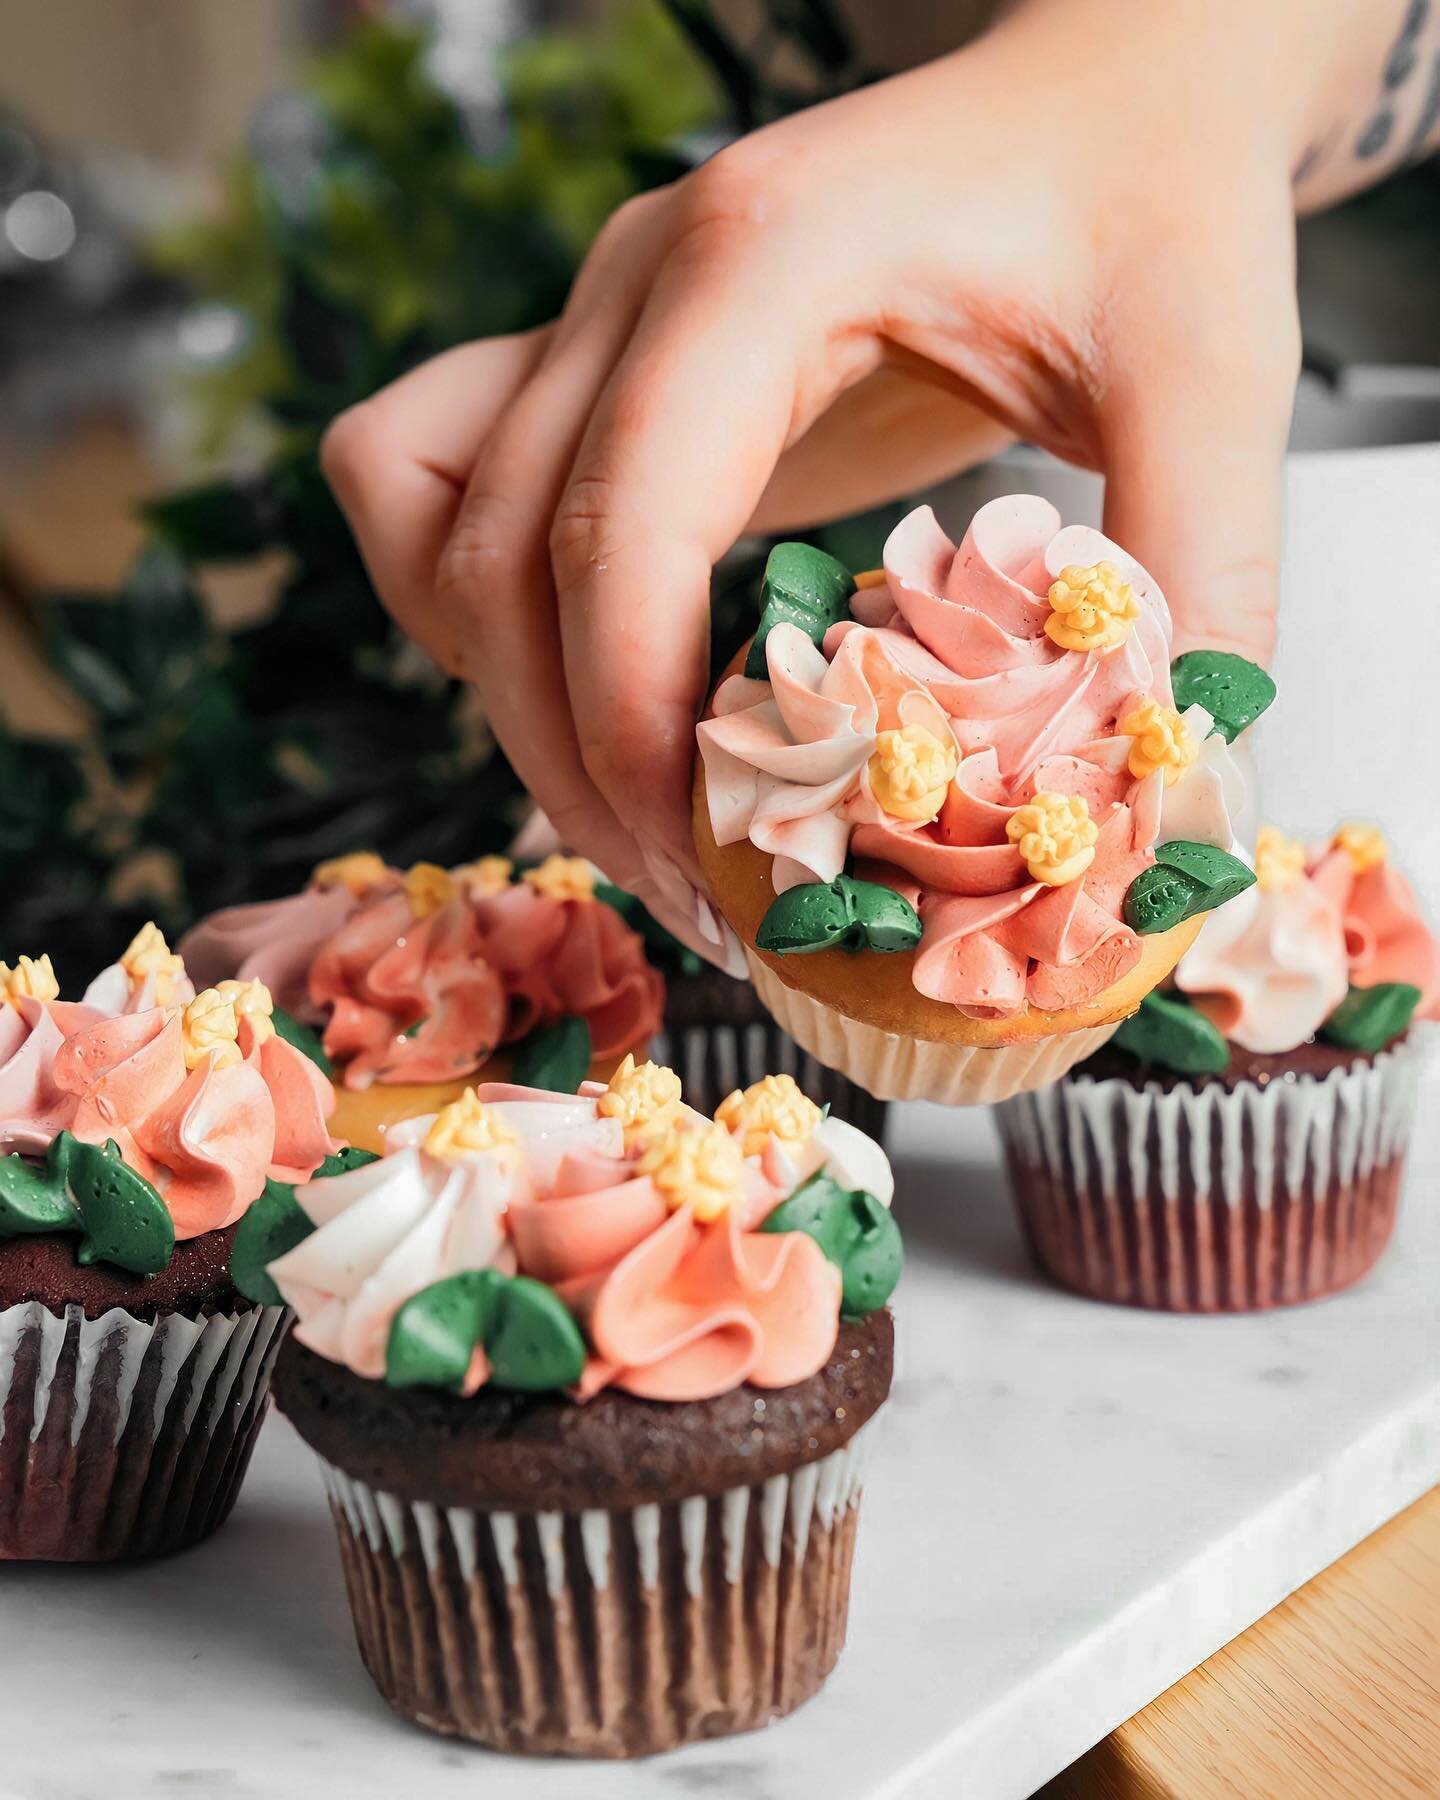 @sweetlife_bakery_official is now taking pre-orders for Mother&rsquo;s Day! What better way to surprise her than with cupcake flowers💐the following pack comes with
2 red-velvet cupcakes 
2 vanilla cupcakes 
2 chocolate cupcakes
You can order by fill